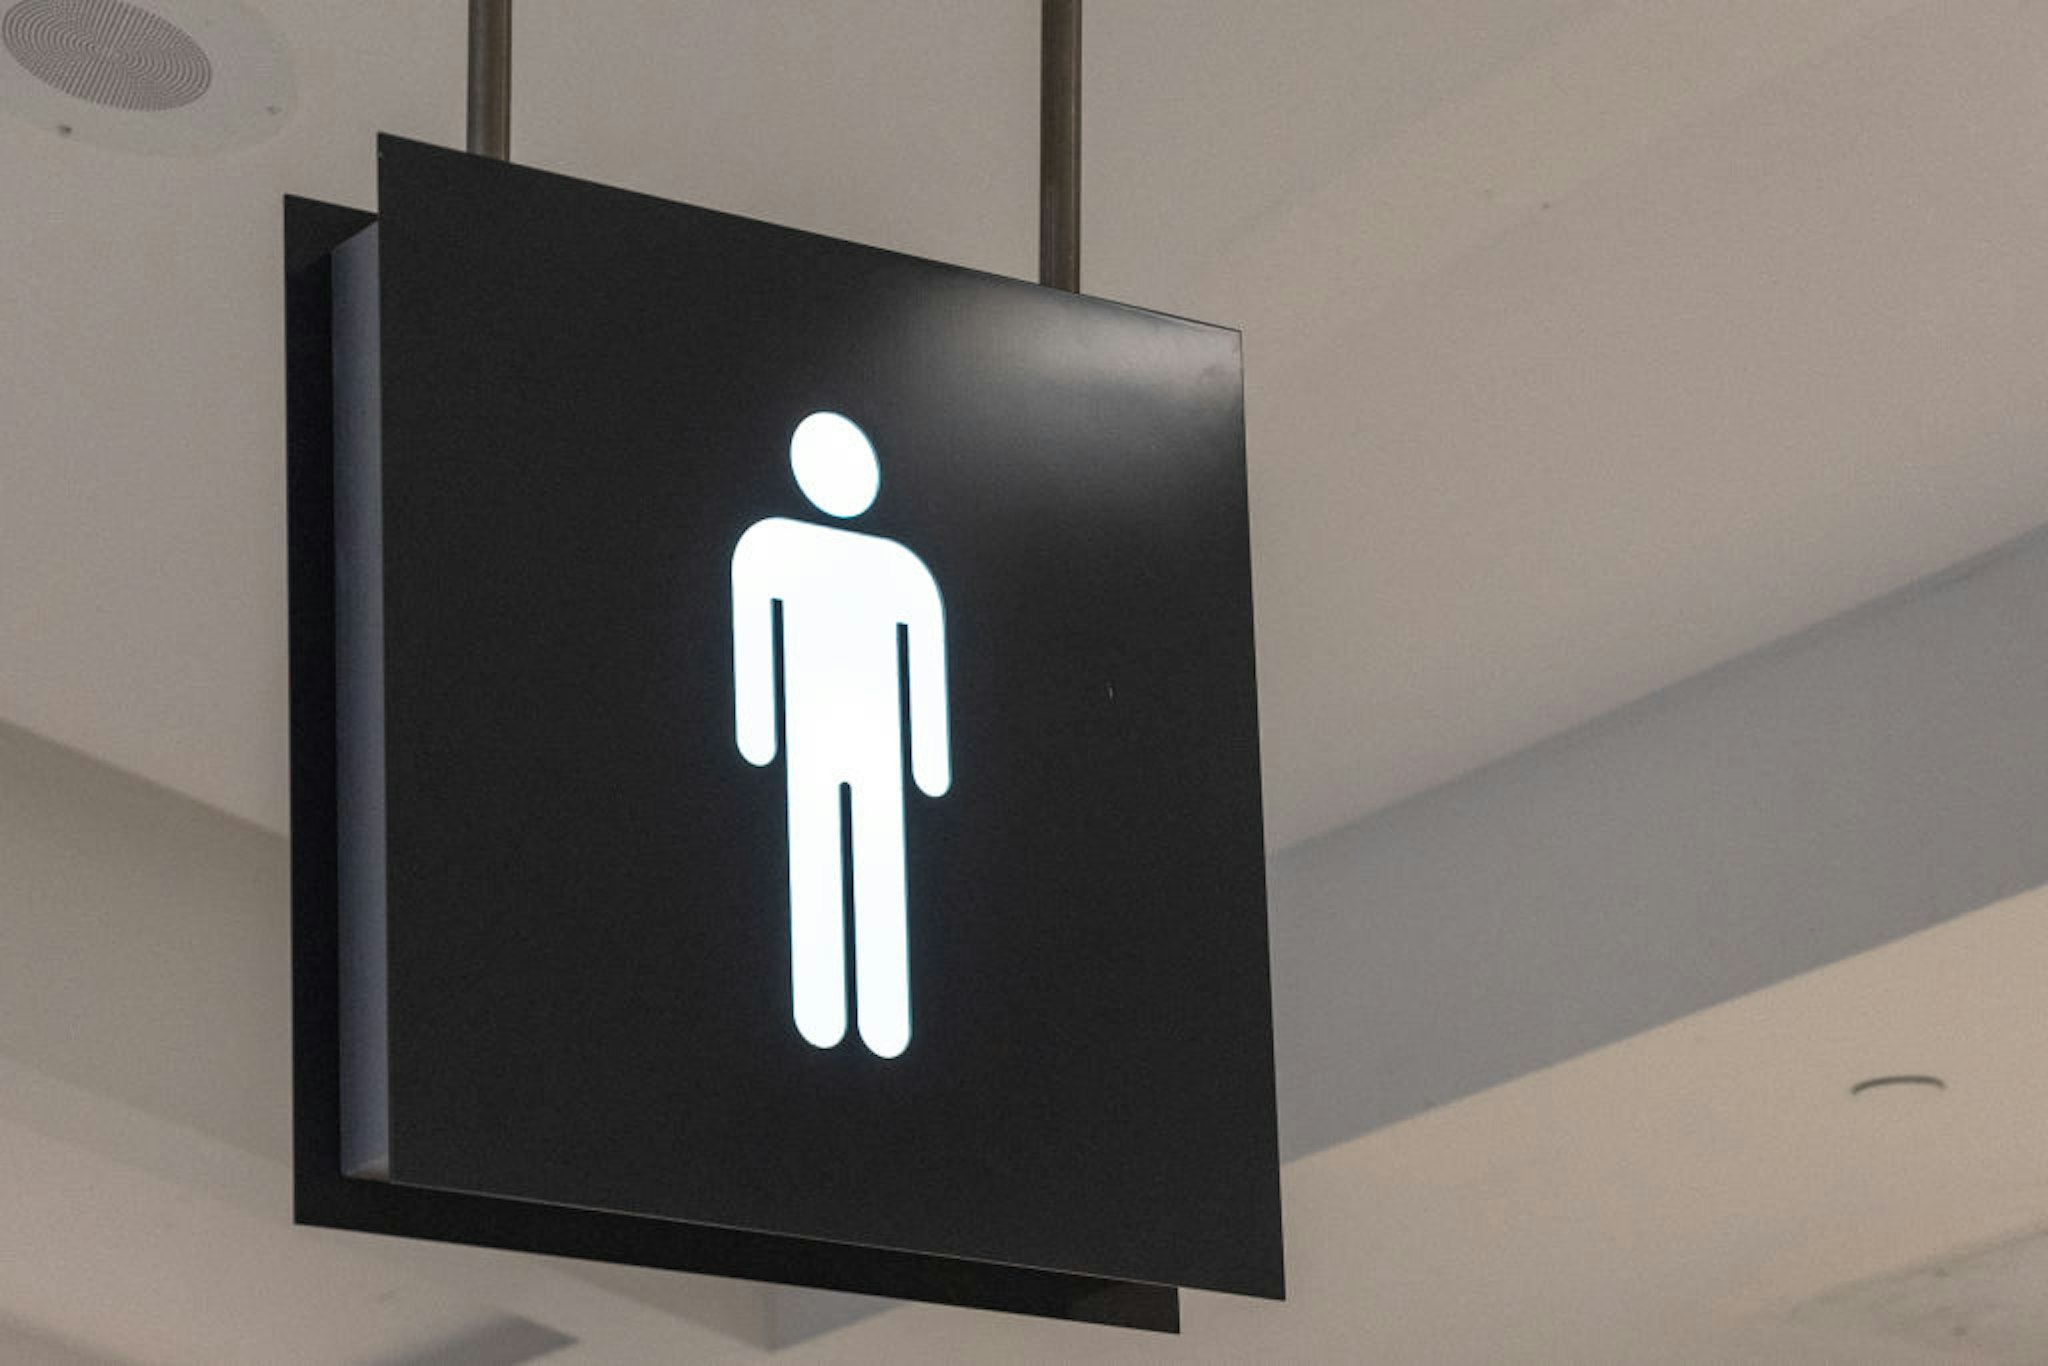 Public washroom or bathroom sign marking the facility is to be used by men.